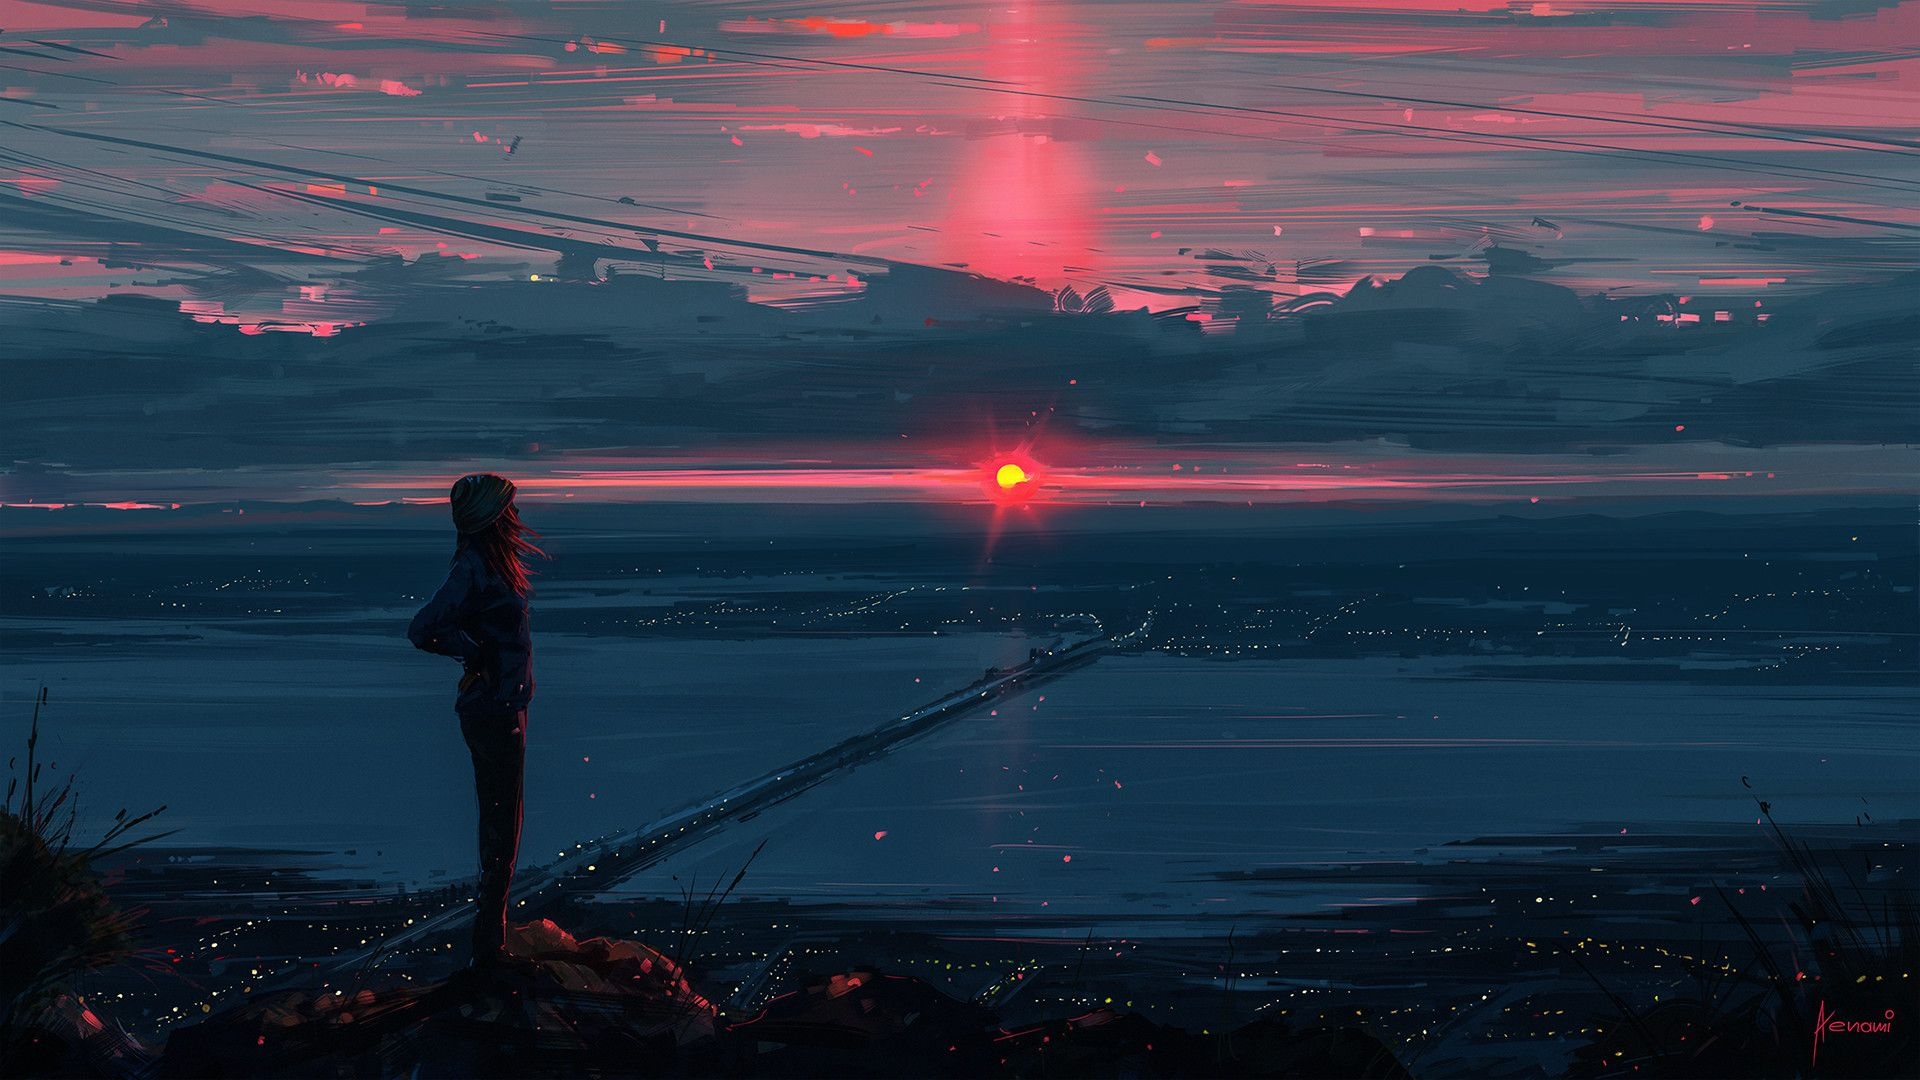 24 Loneliness Anime City Wallpapers - Wallpaperboat